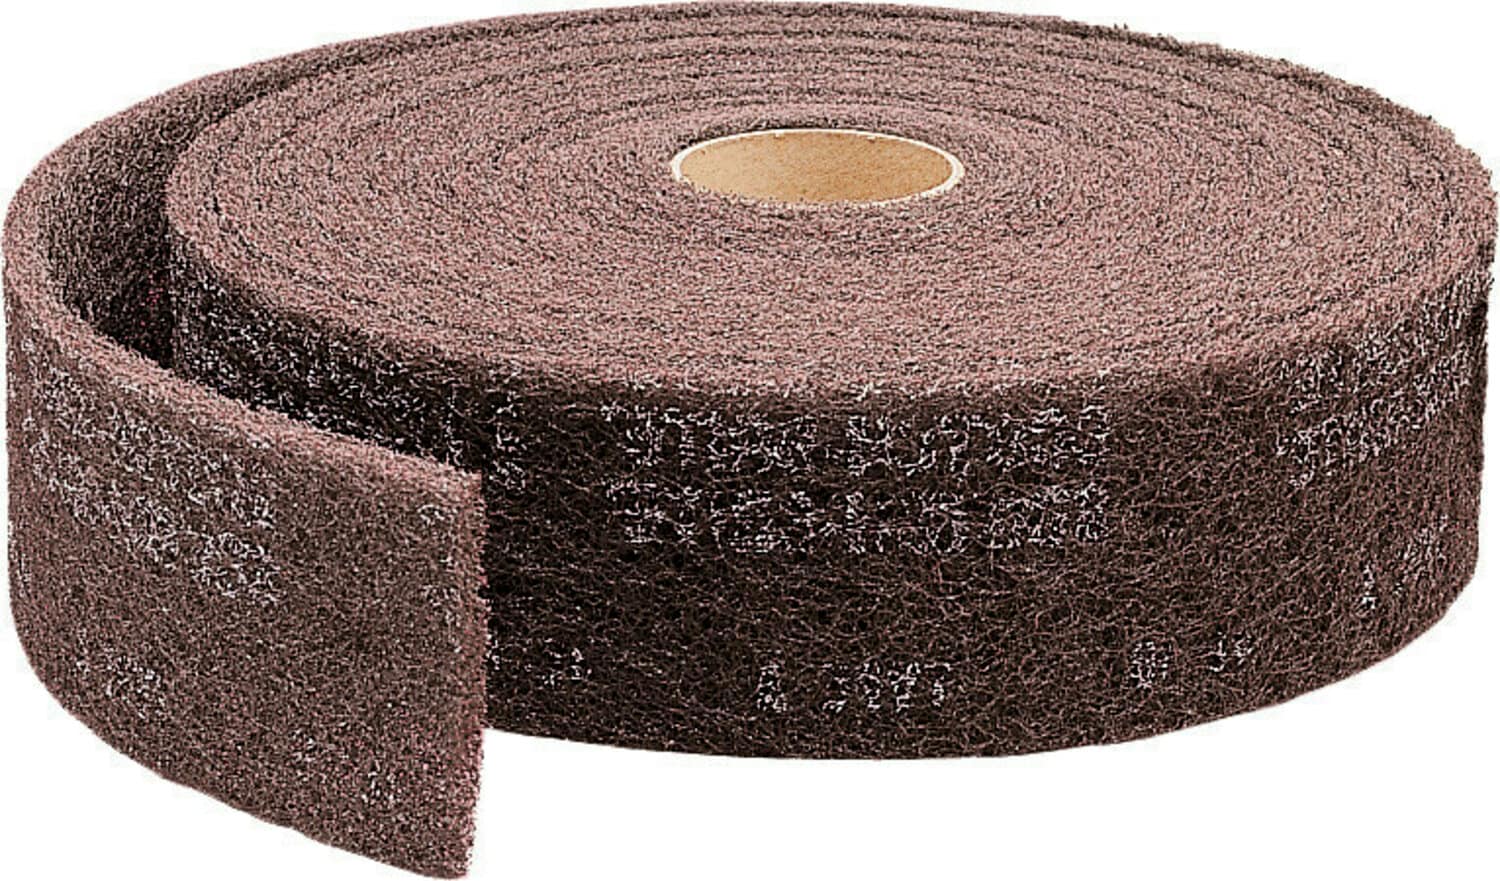 7100214890 - Scotch-Brite SE Surface Conditioning Roll, SE-RL, A/O Coarse, 50-1/2 in
x 21 ft, 1 ea/Pallet